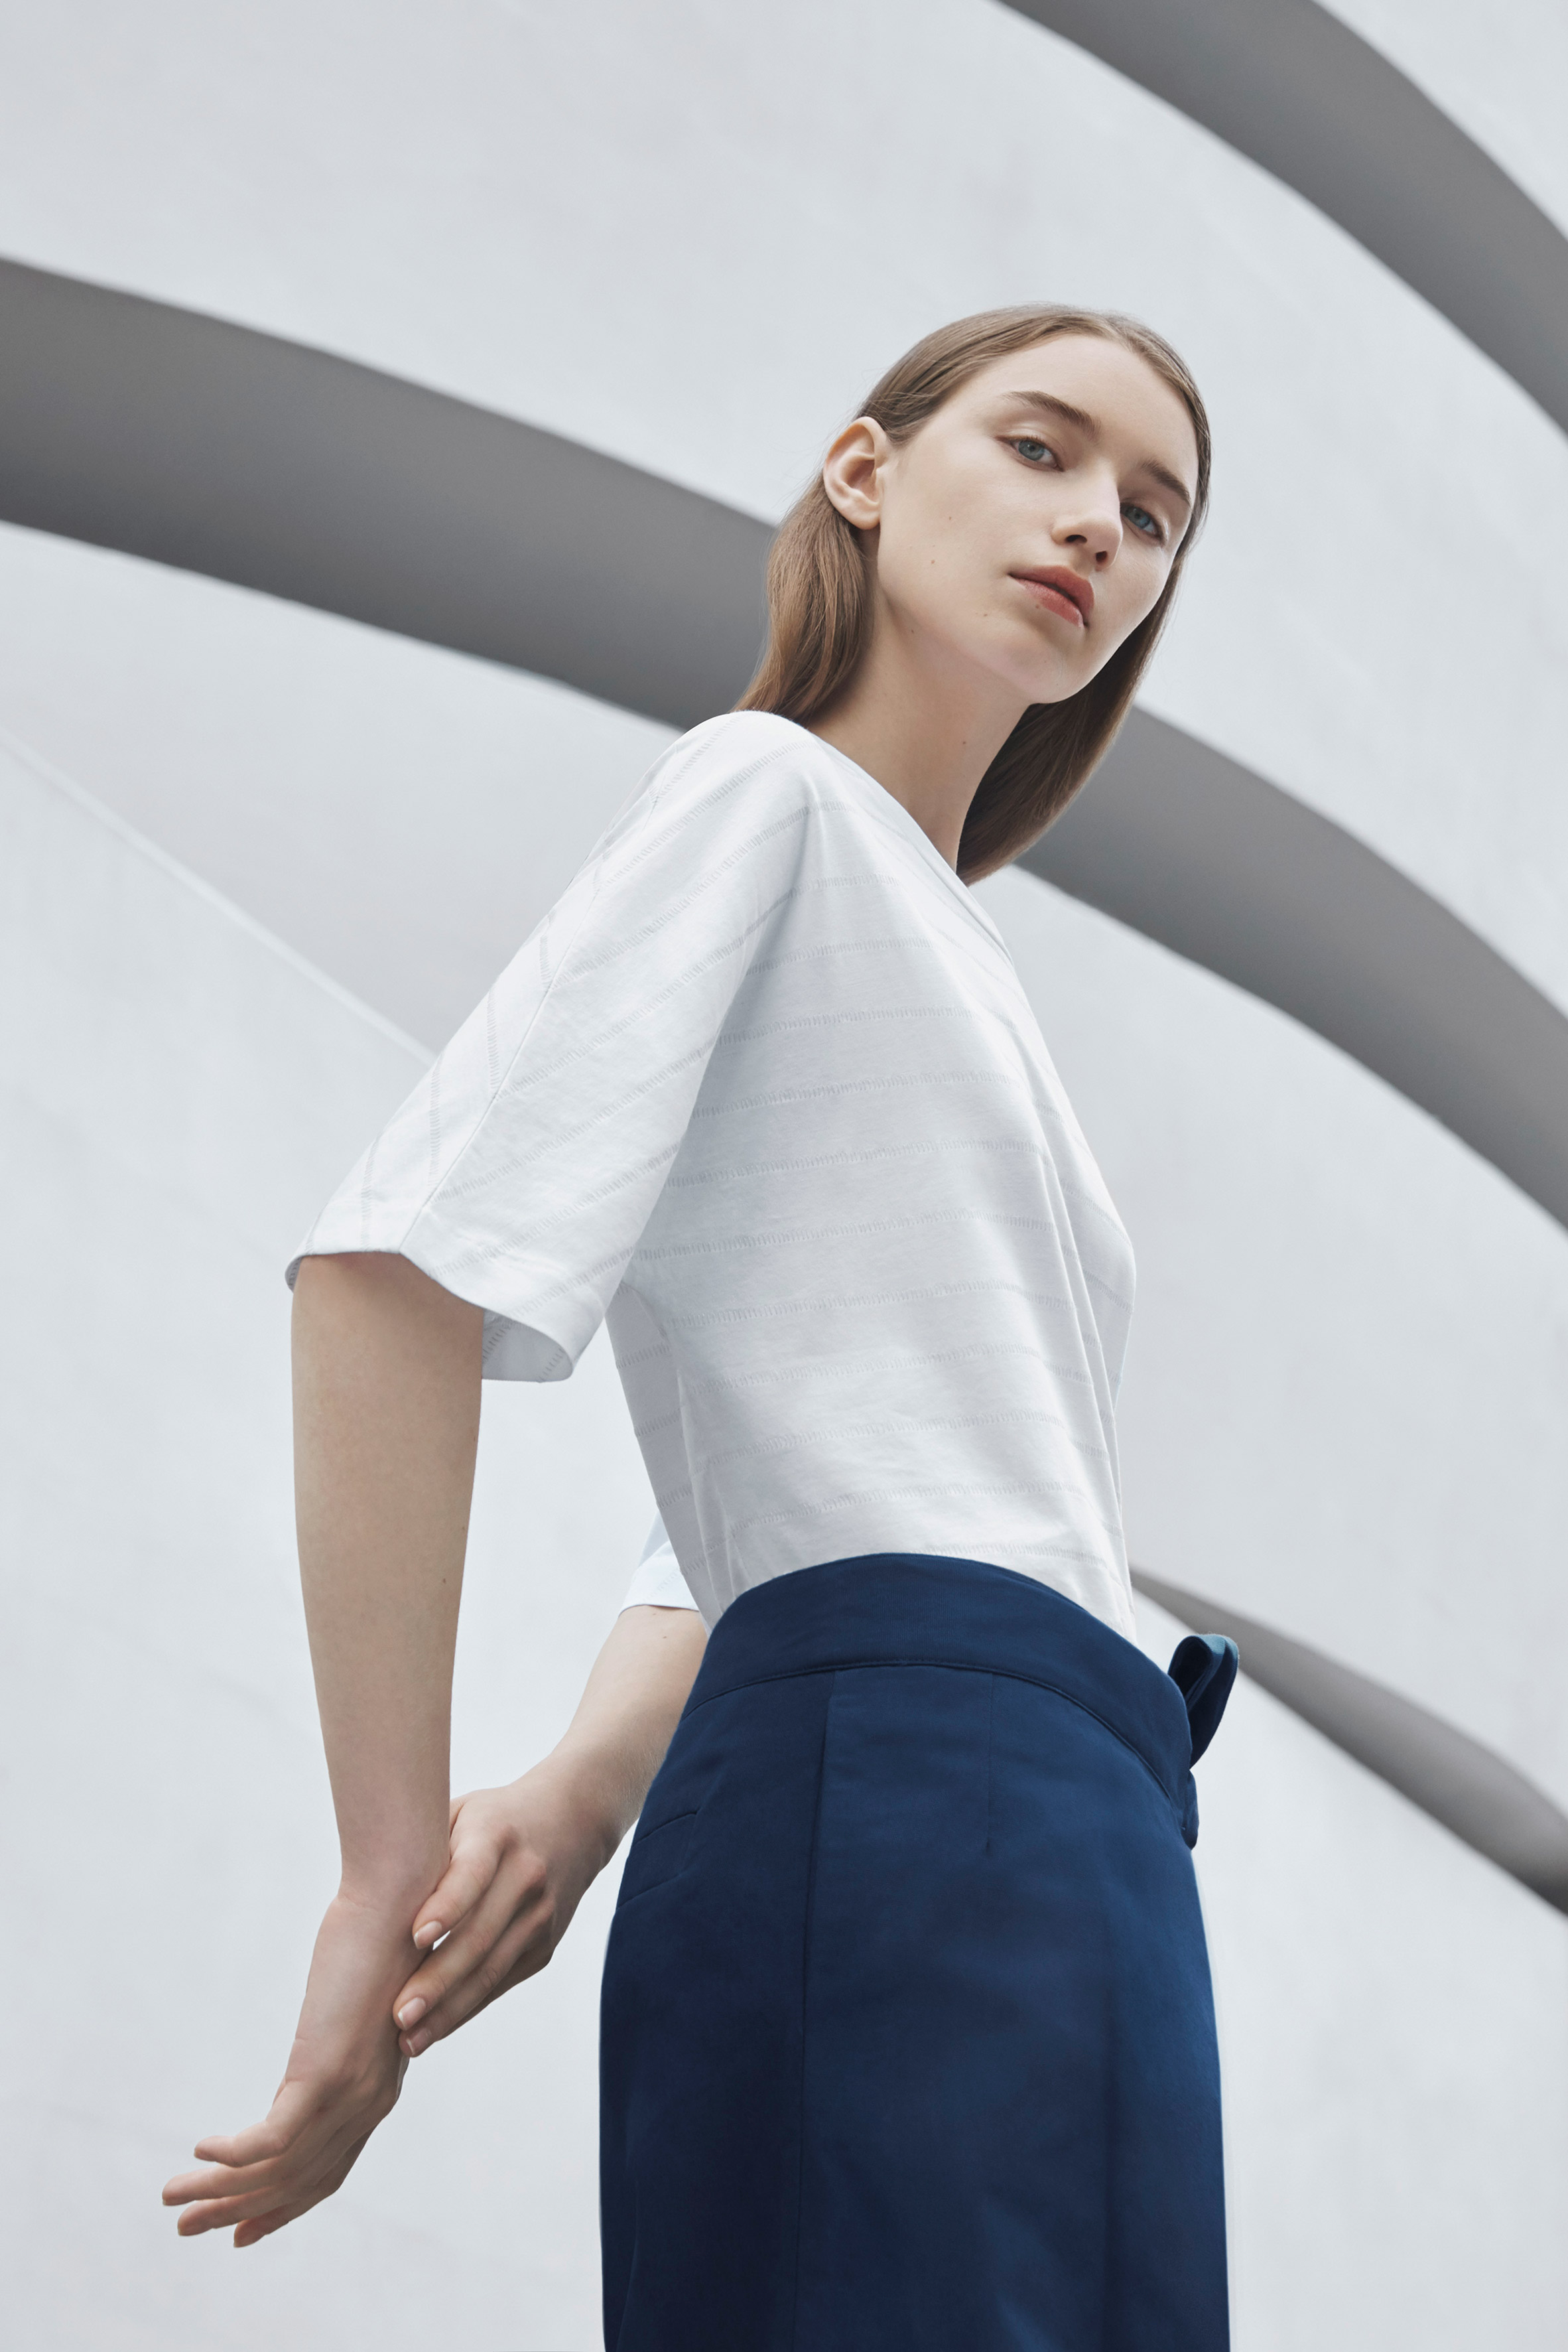 COS unveils collection inspired by minimalist artist Agnes Martin